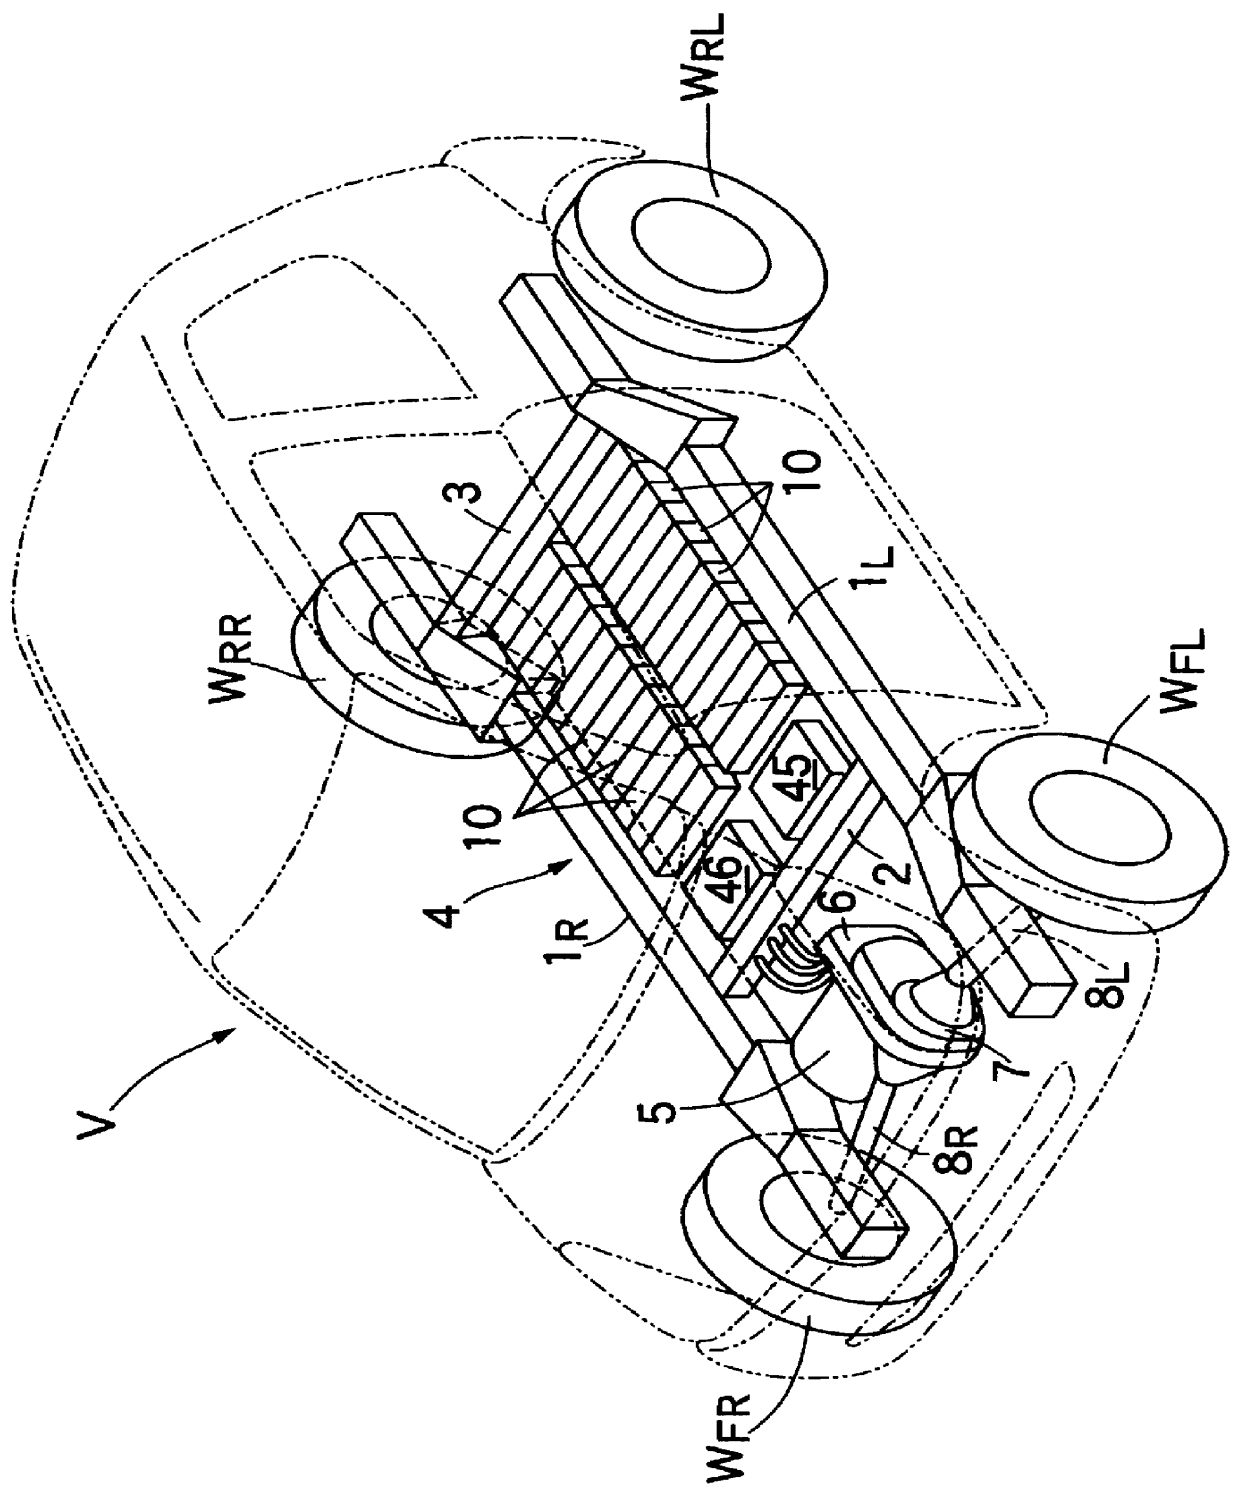 Cooling structure an electric vehicle